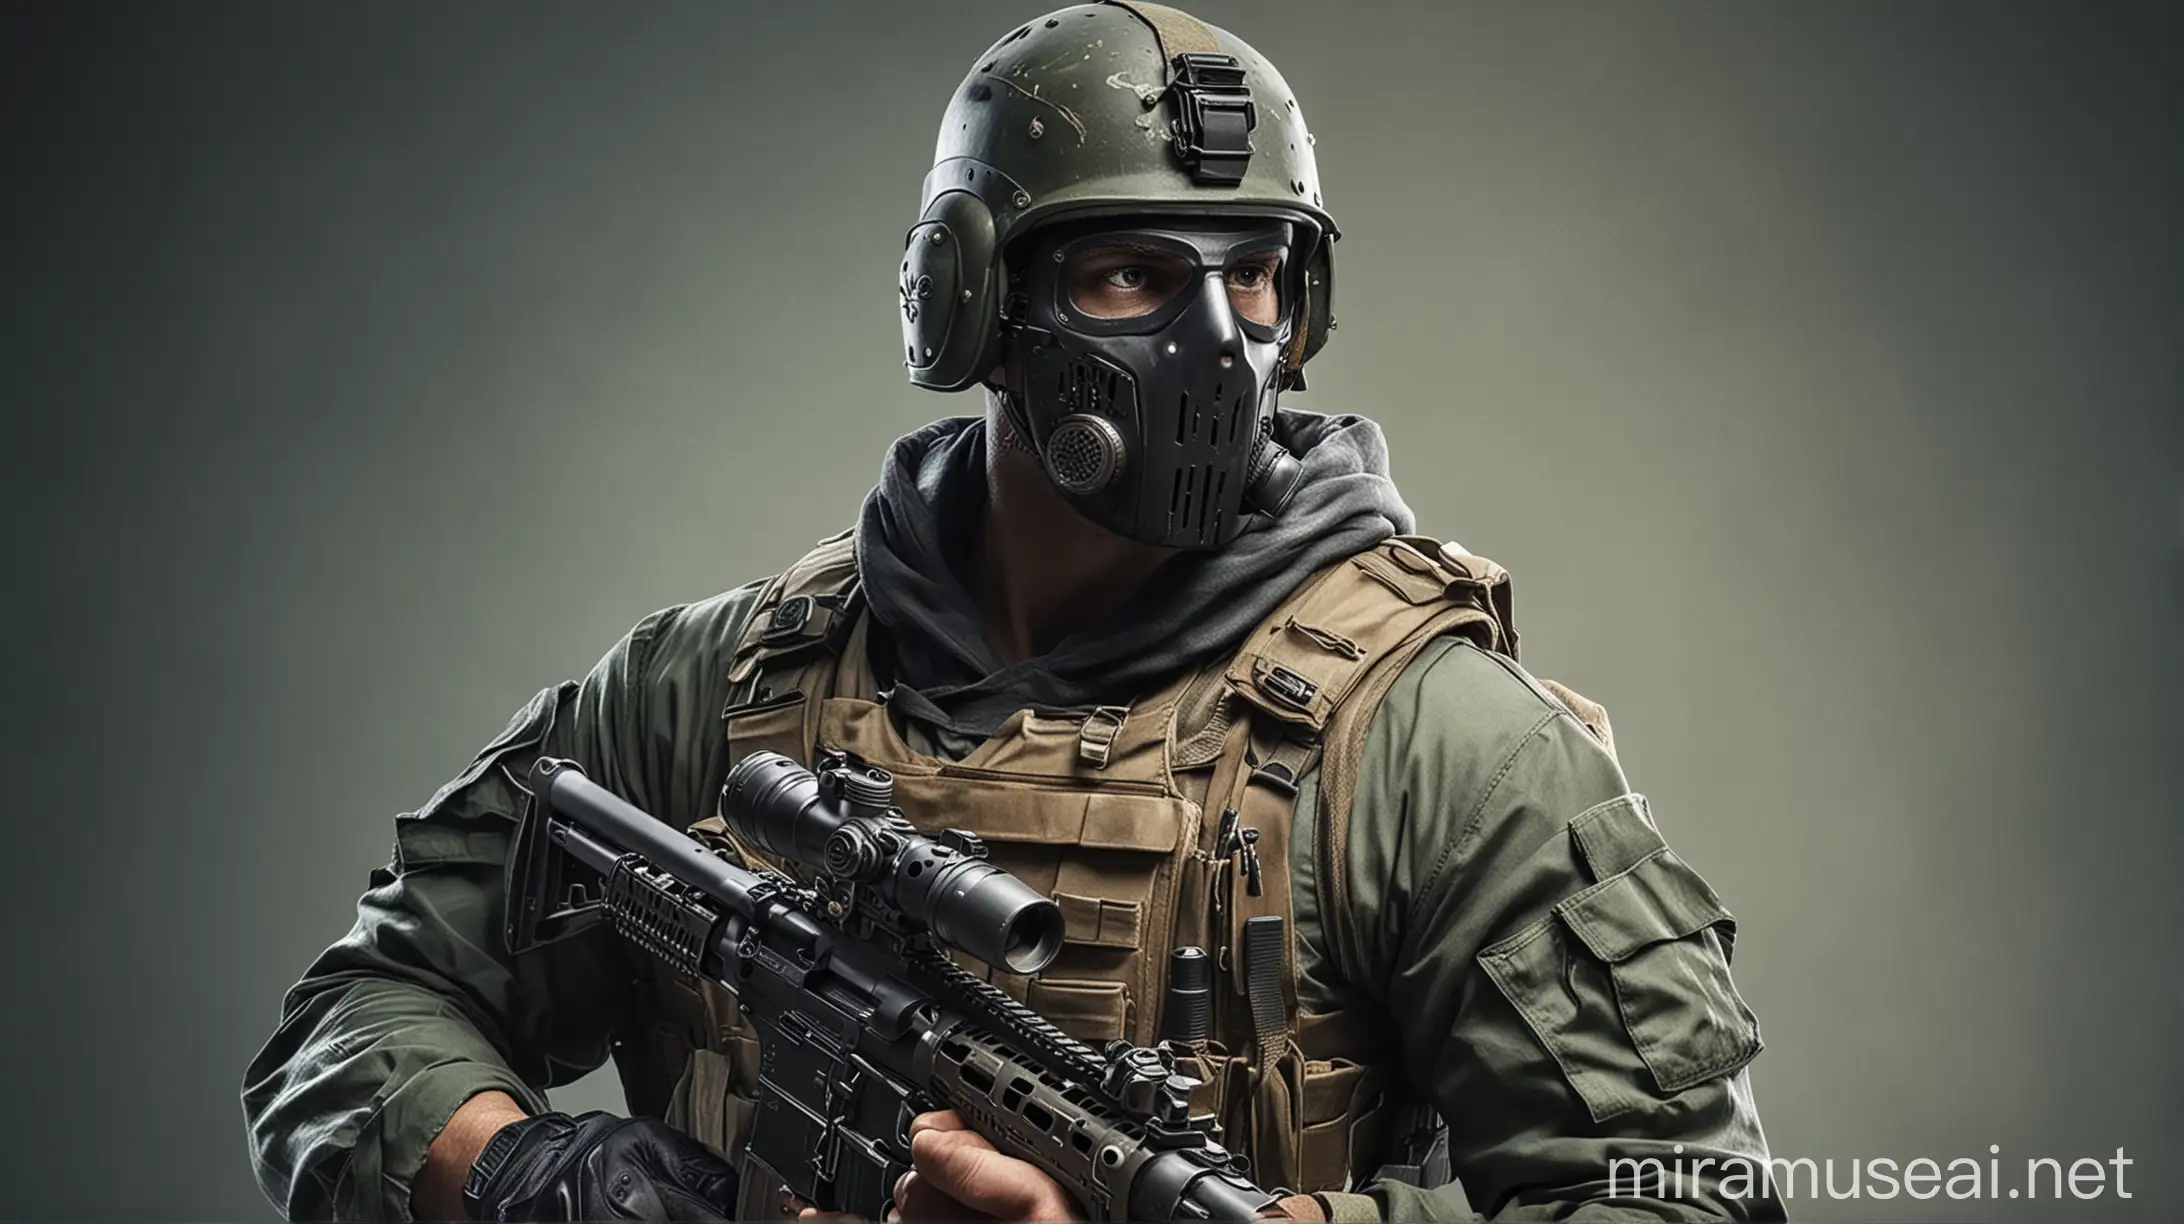 Create a commando with a gun in hand, with a mask on his face and military helmet on the head